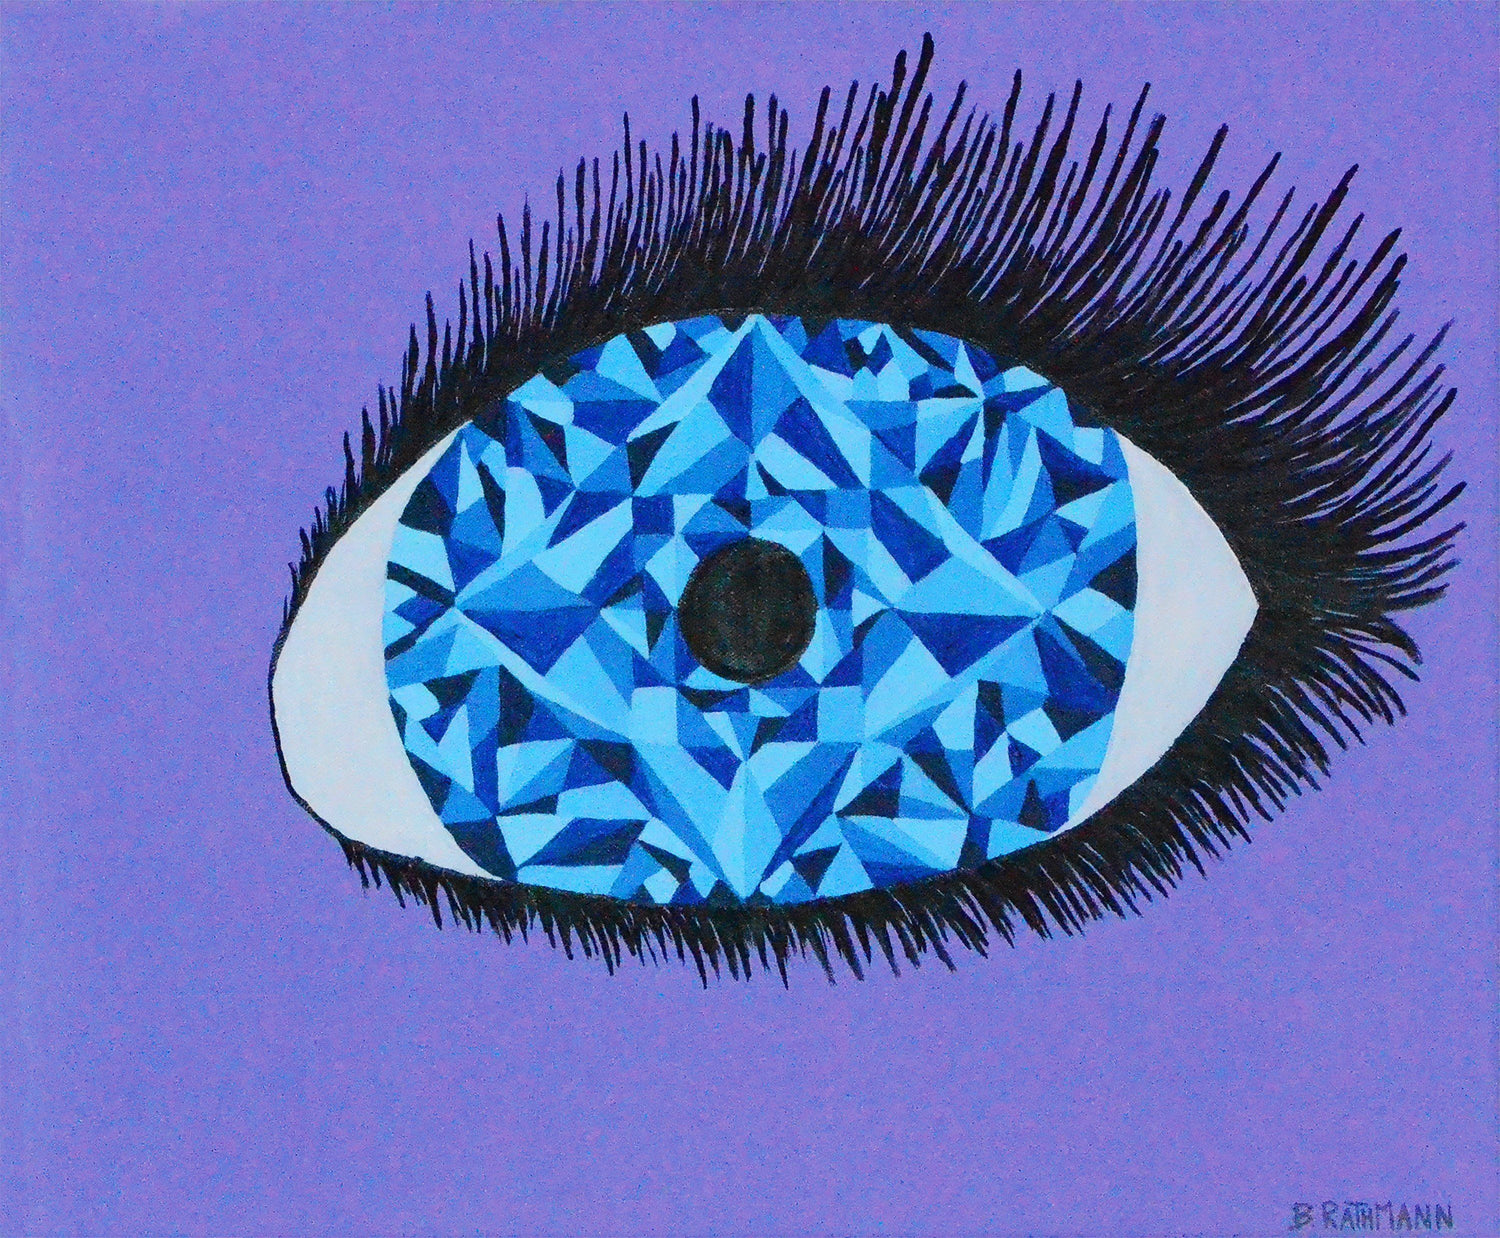 A physical art print that features a large blue diamond eye on a lavender purple background.